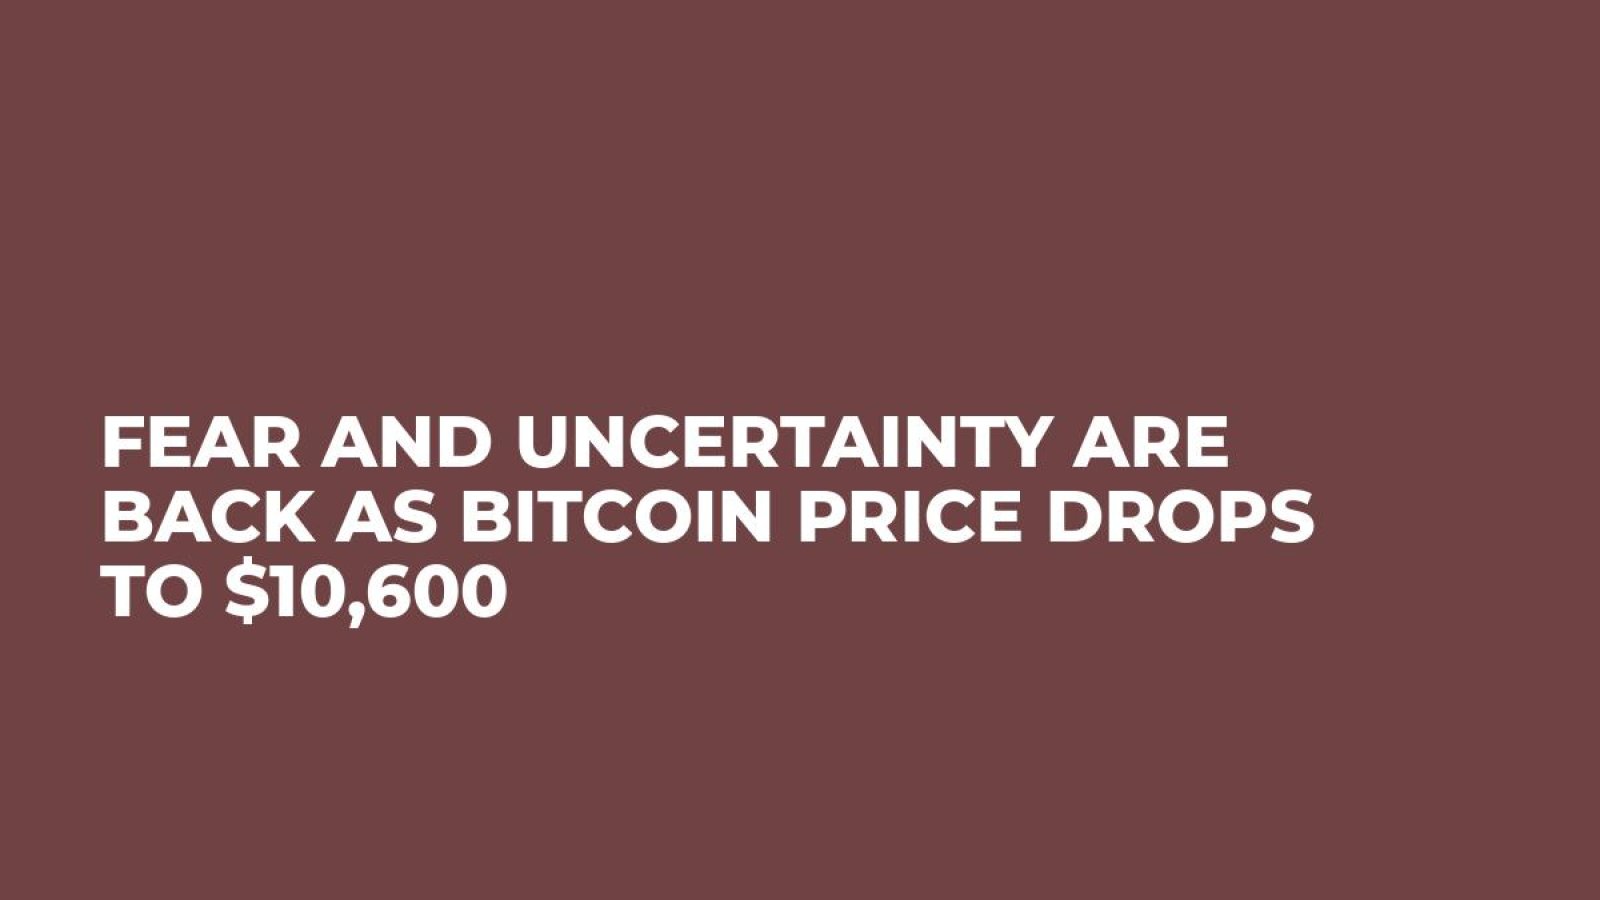 Fear and Uncertainty Are Back As Bitcoin Price Drops to $10,600